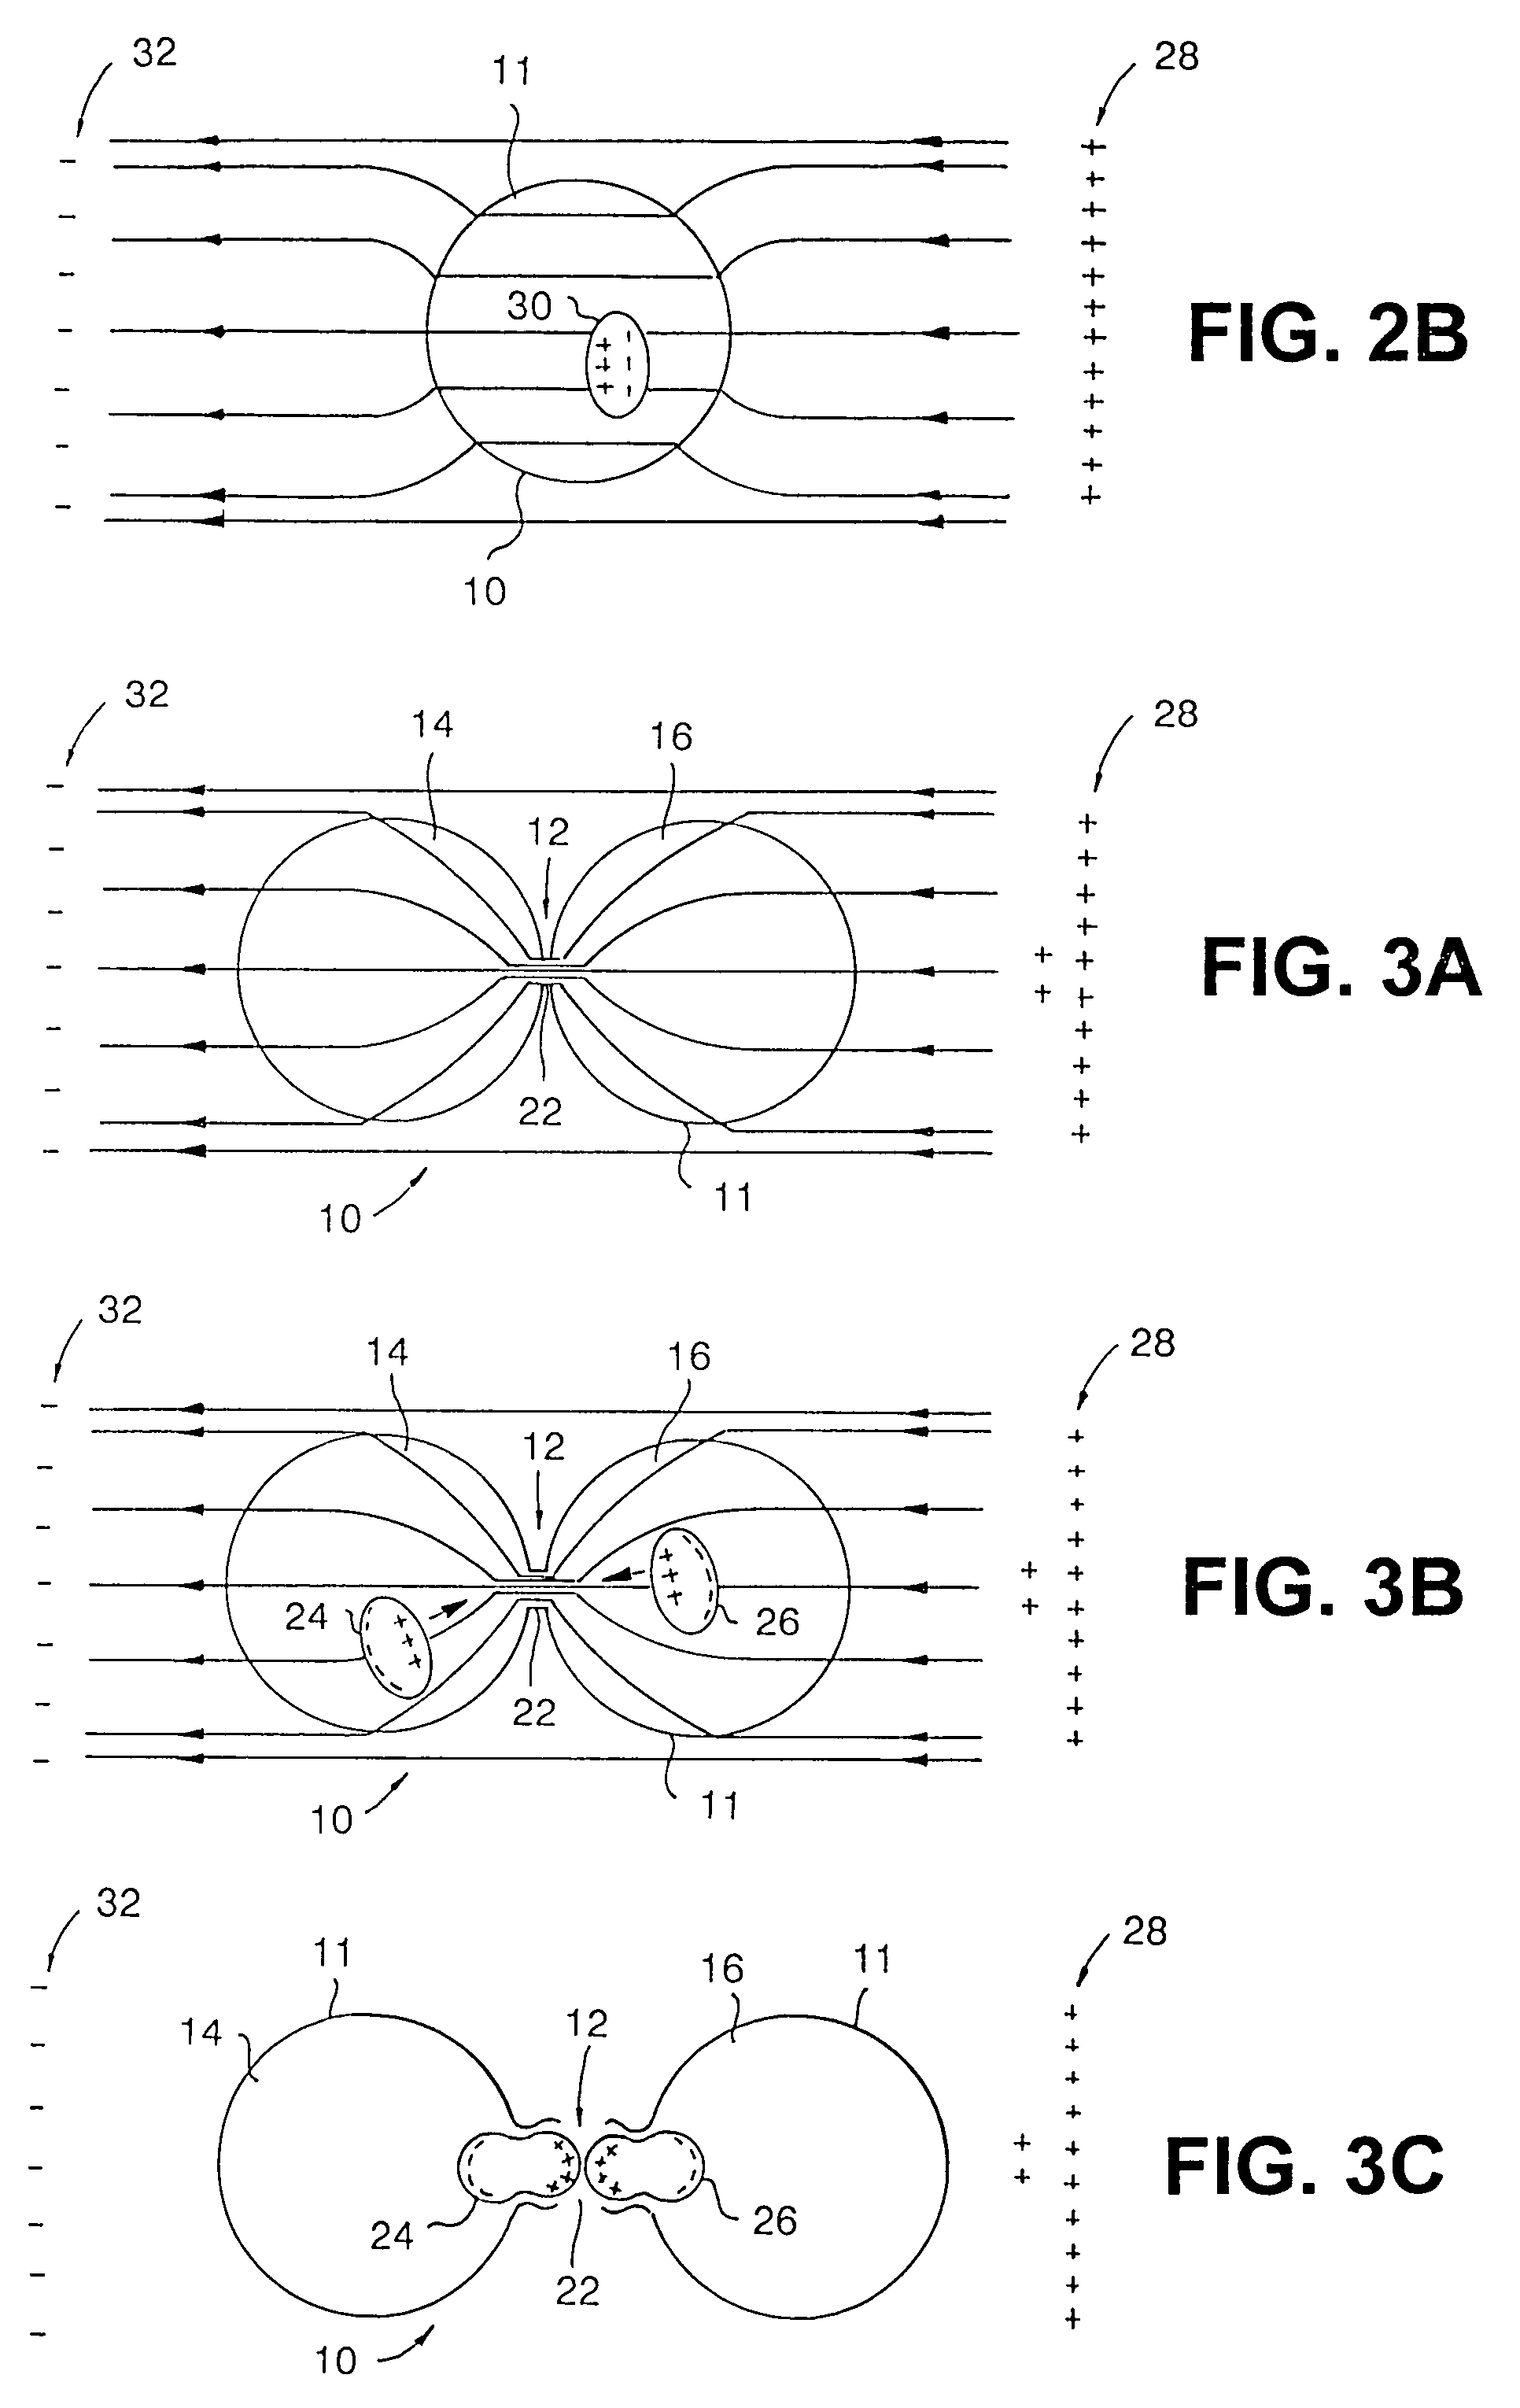 Apparatus and method for optimizing tumor treatment efficiency by electric fields